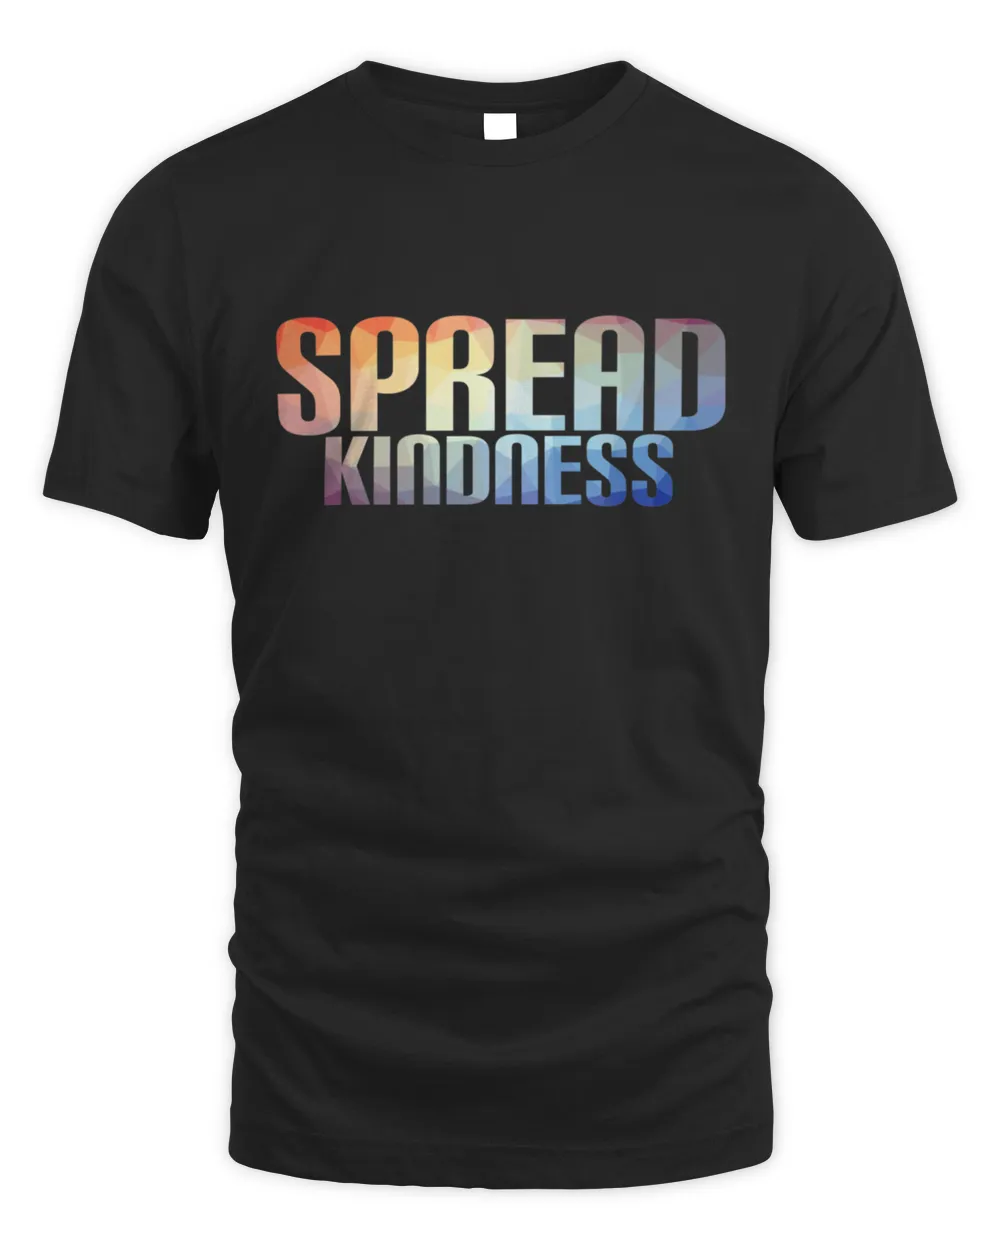 Spread Kindness Lgbtq Gender Marriage Equality AntiRacism T-Shirt